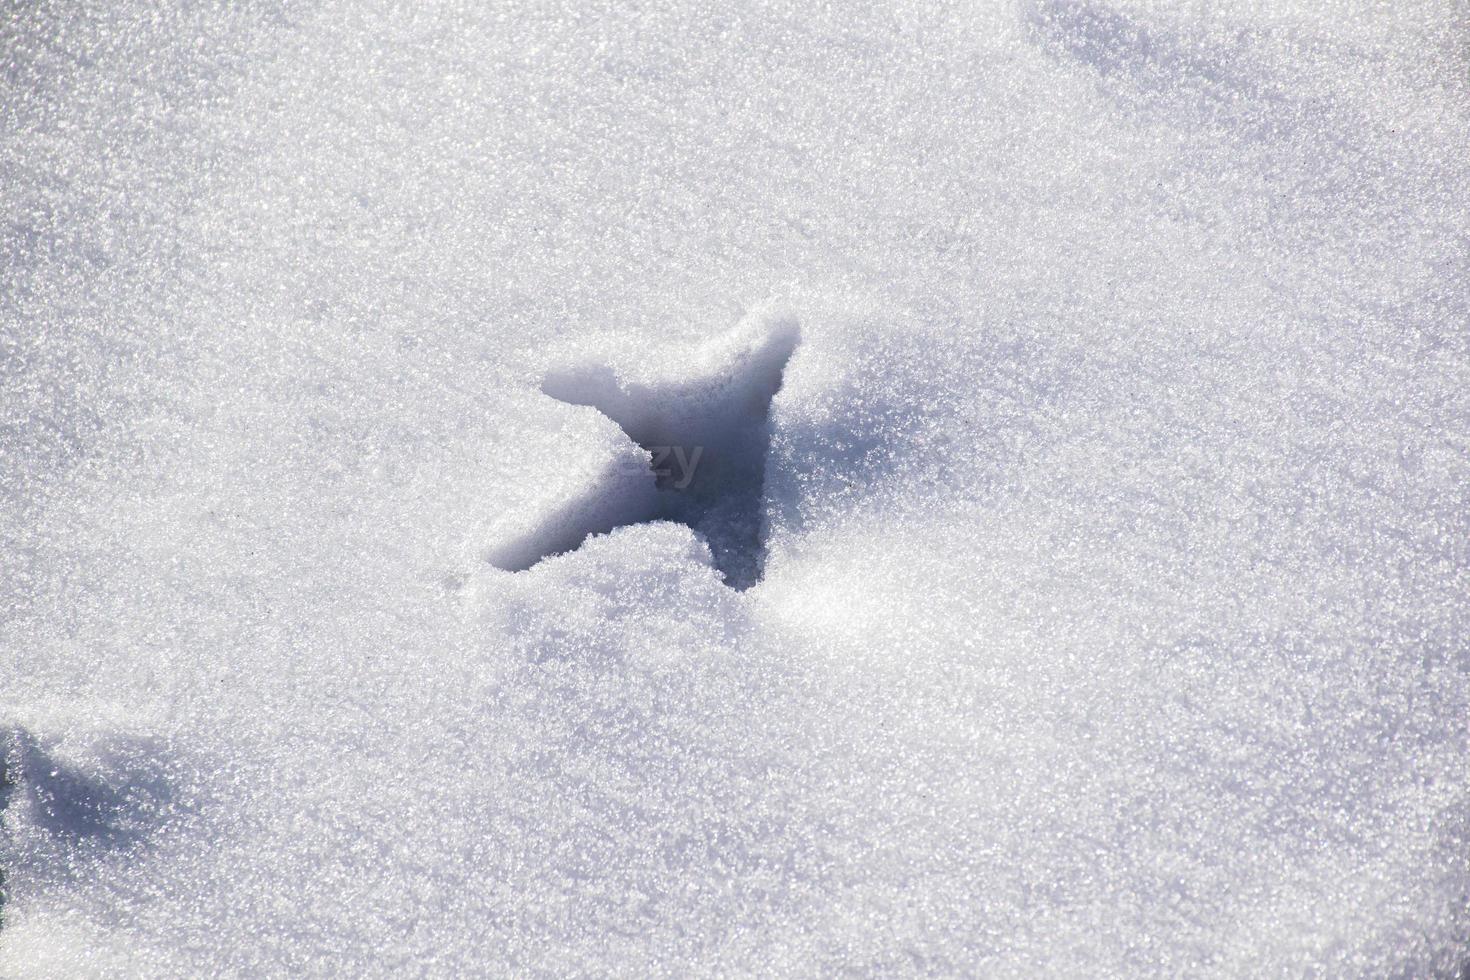 Footprints in the snow photo